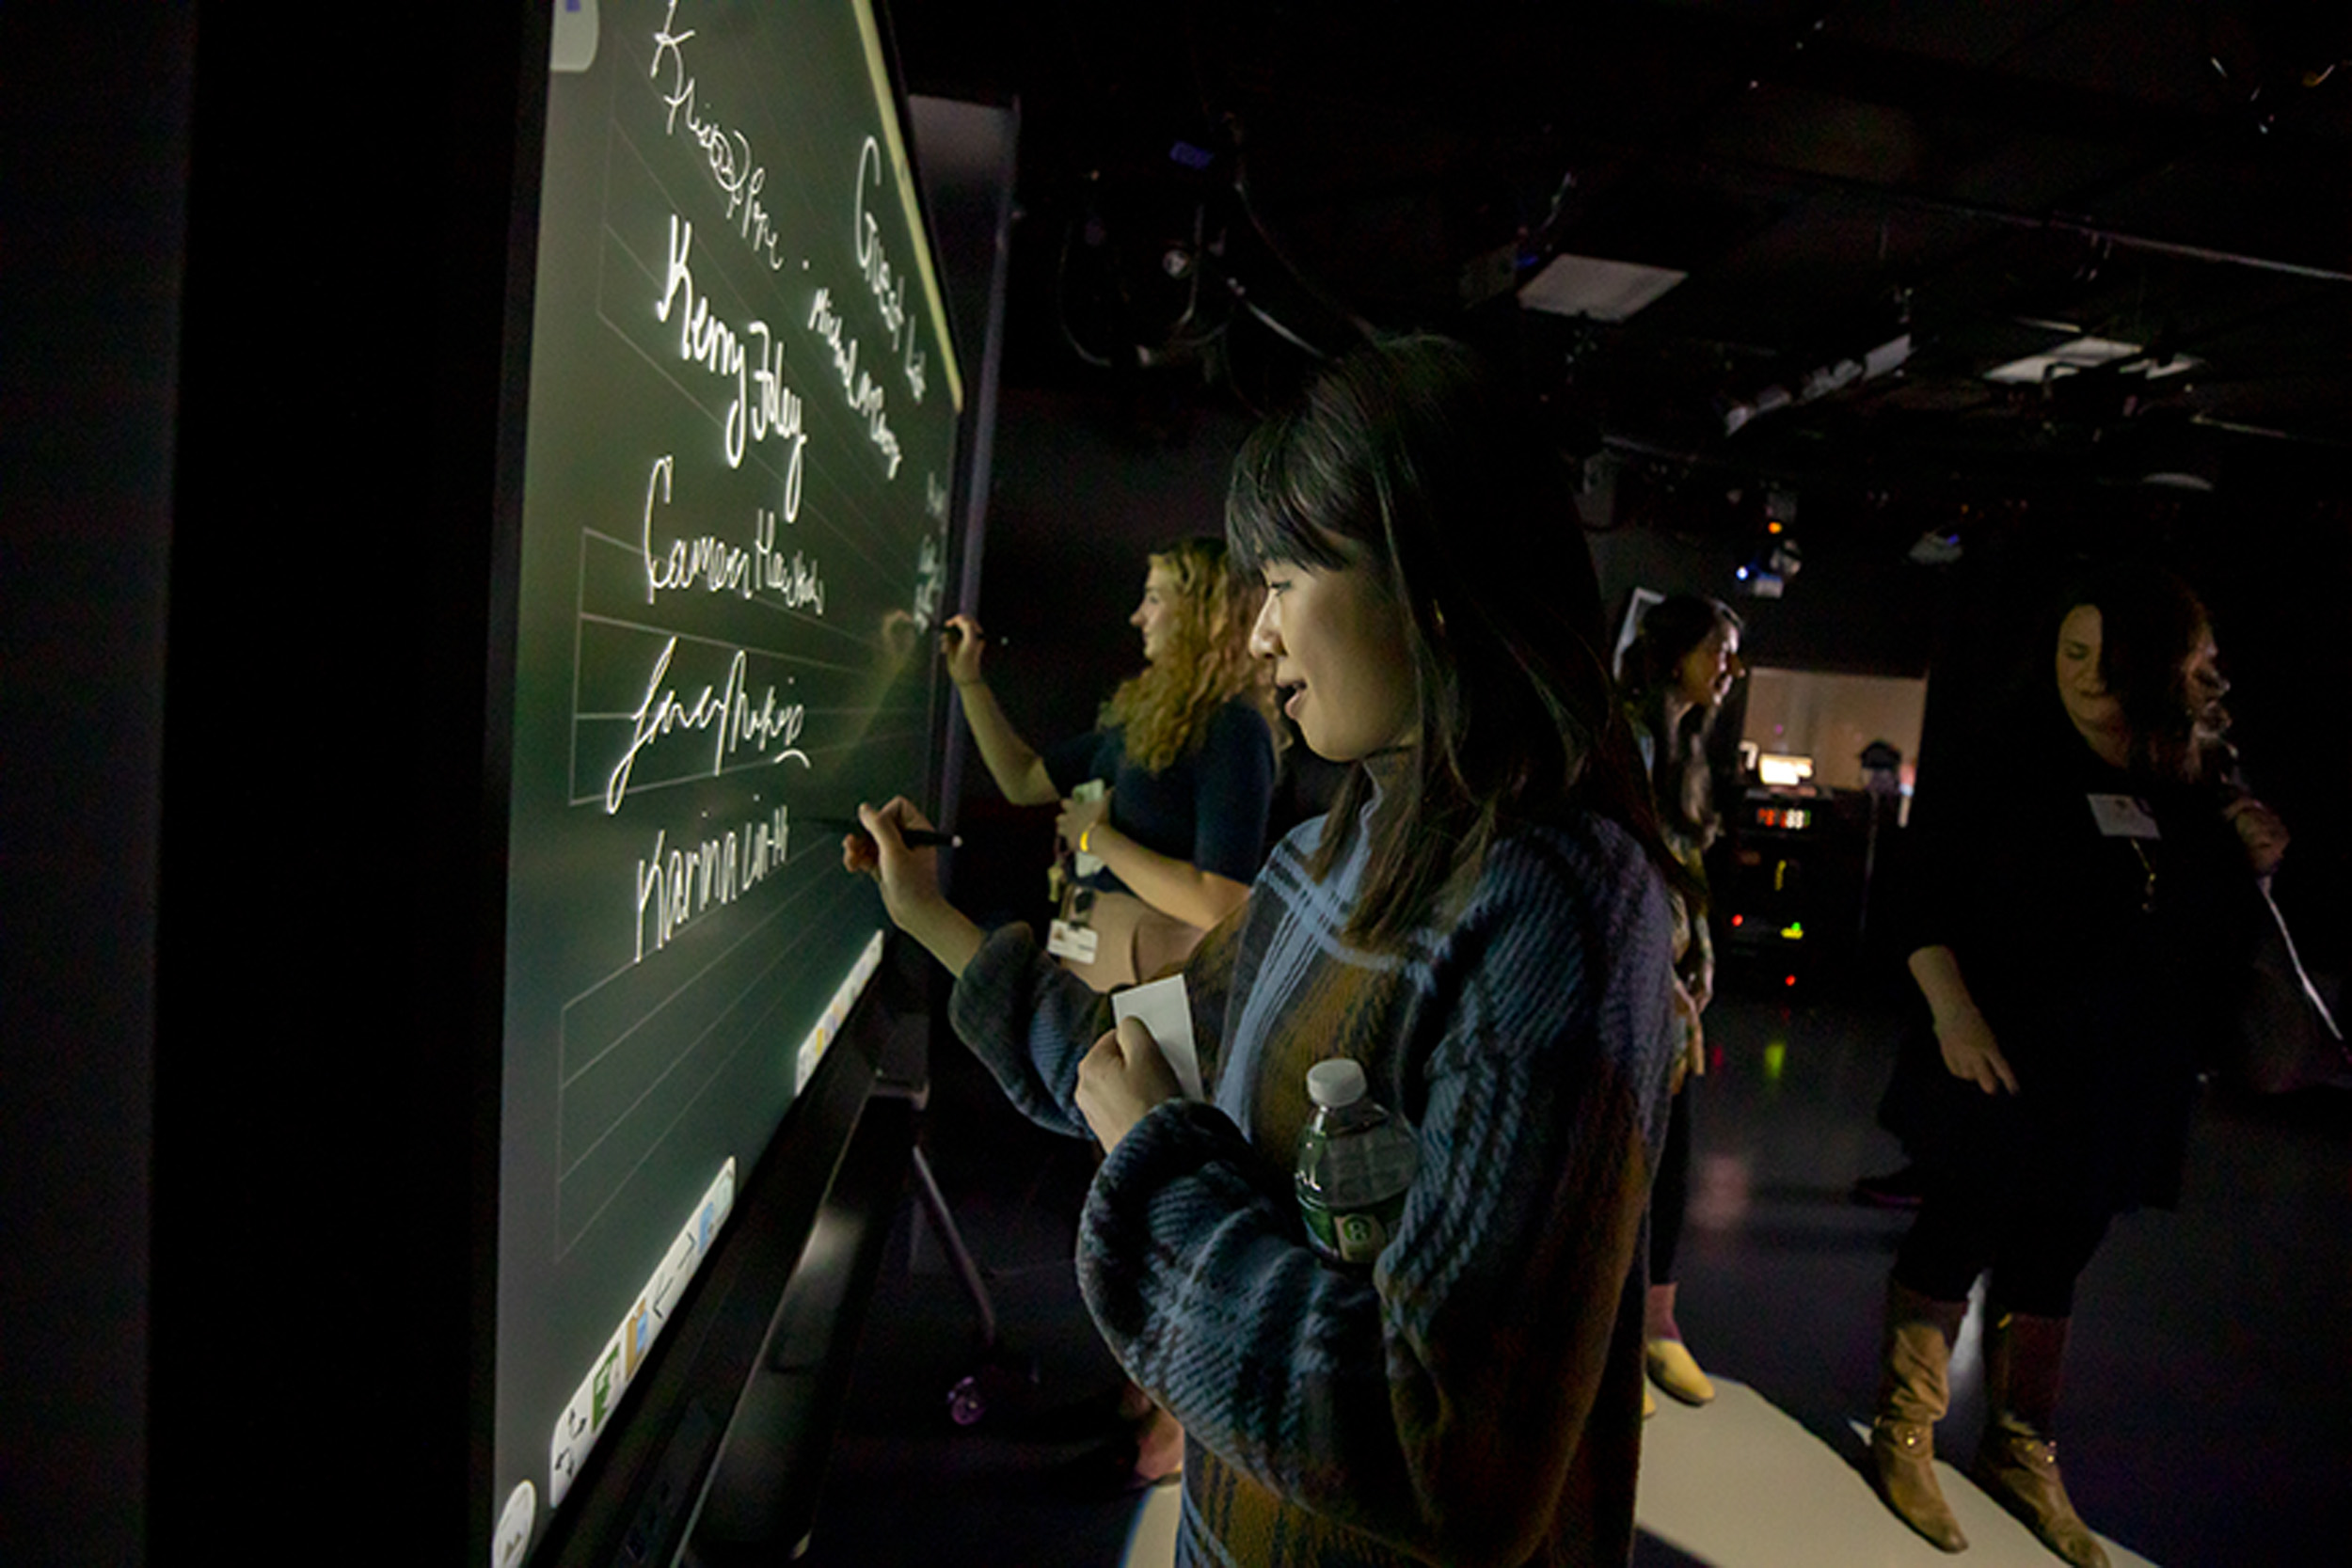 Karina Lin-Murphy writes her name on the welcome board in the new tv studio